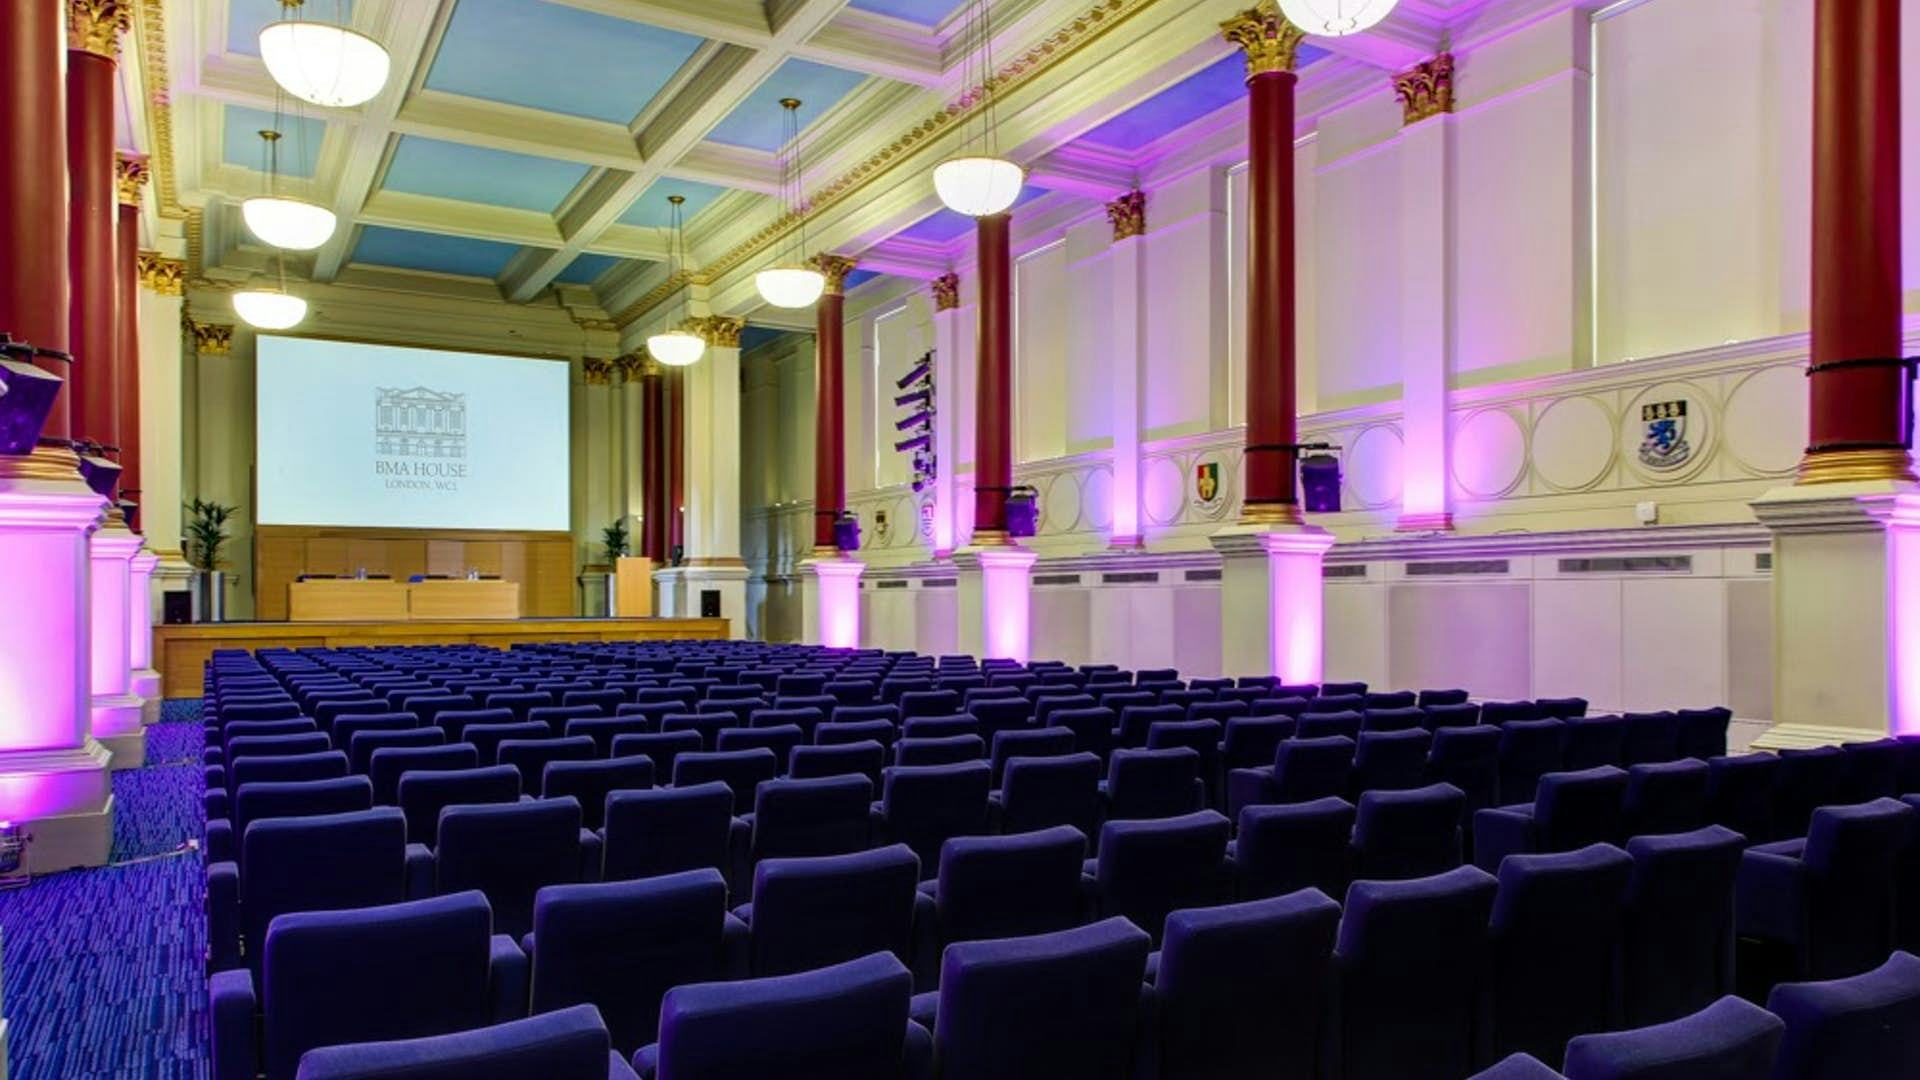 Conference set up at BMA house